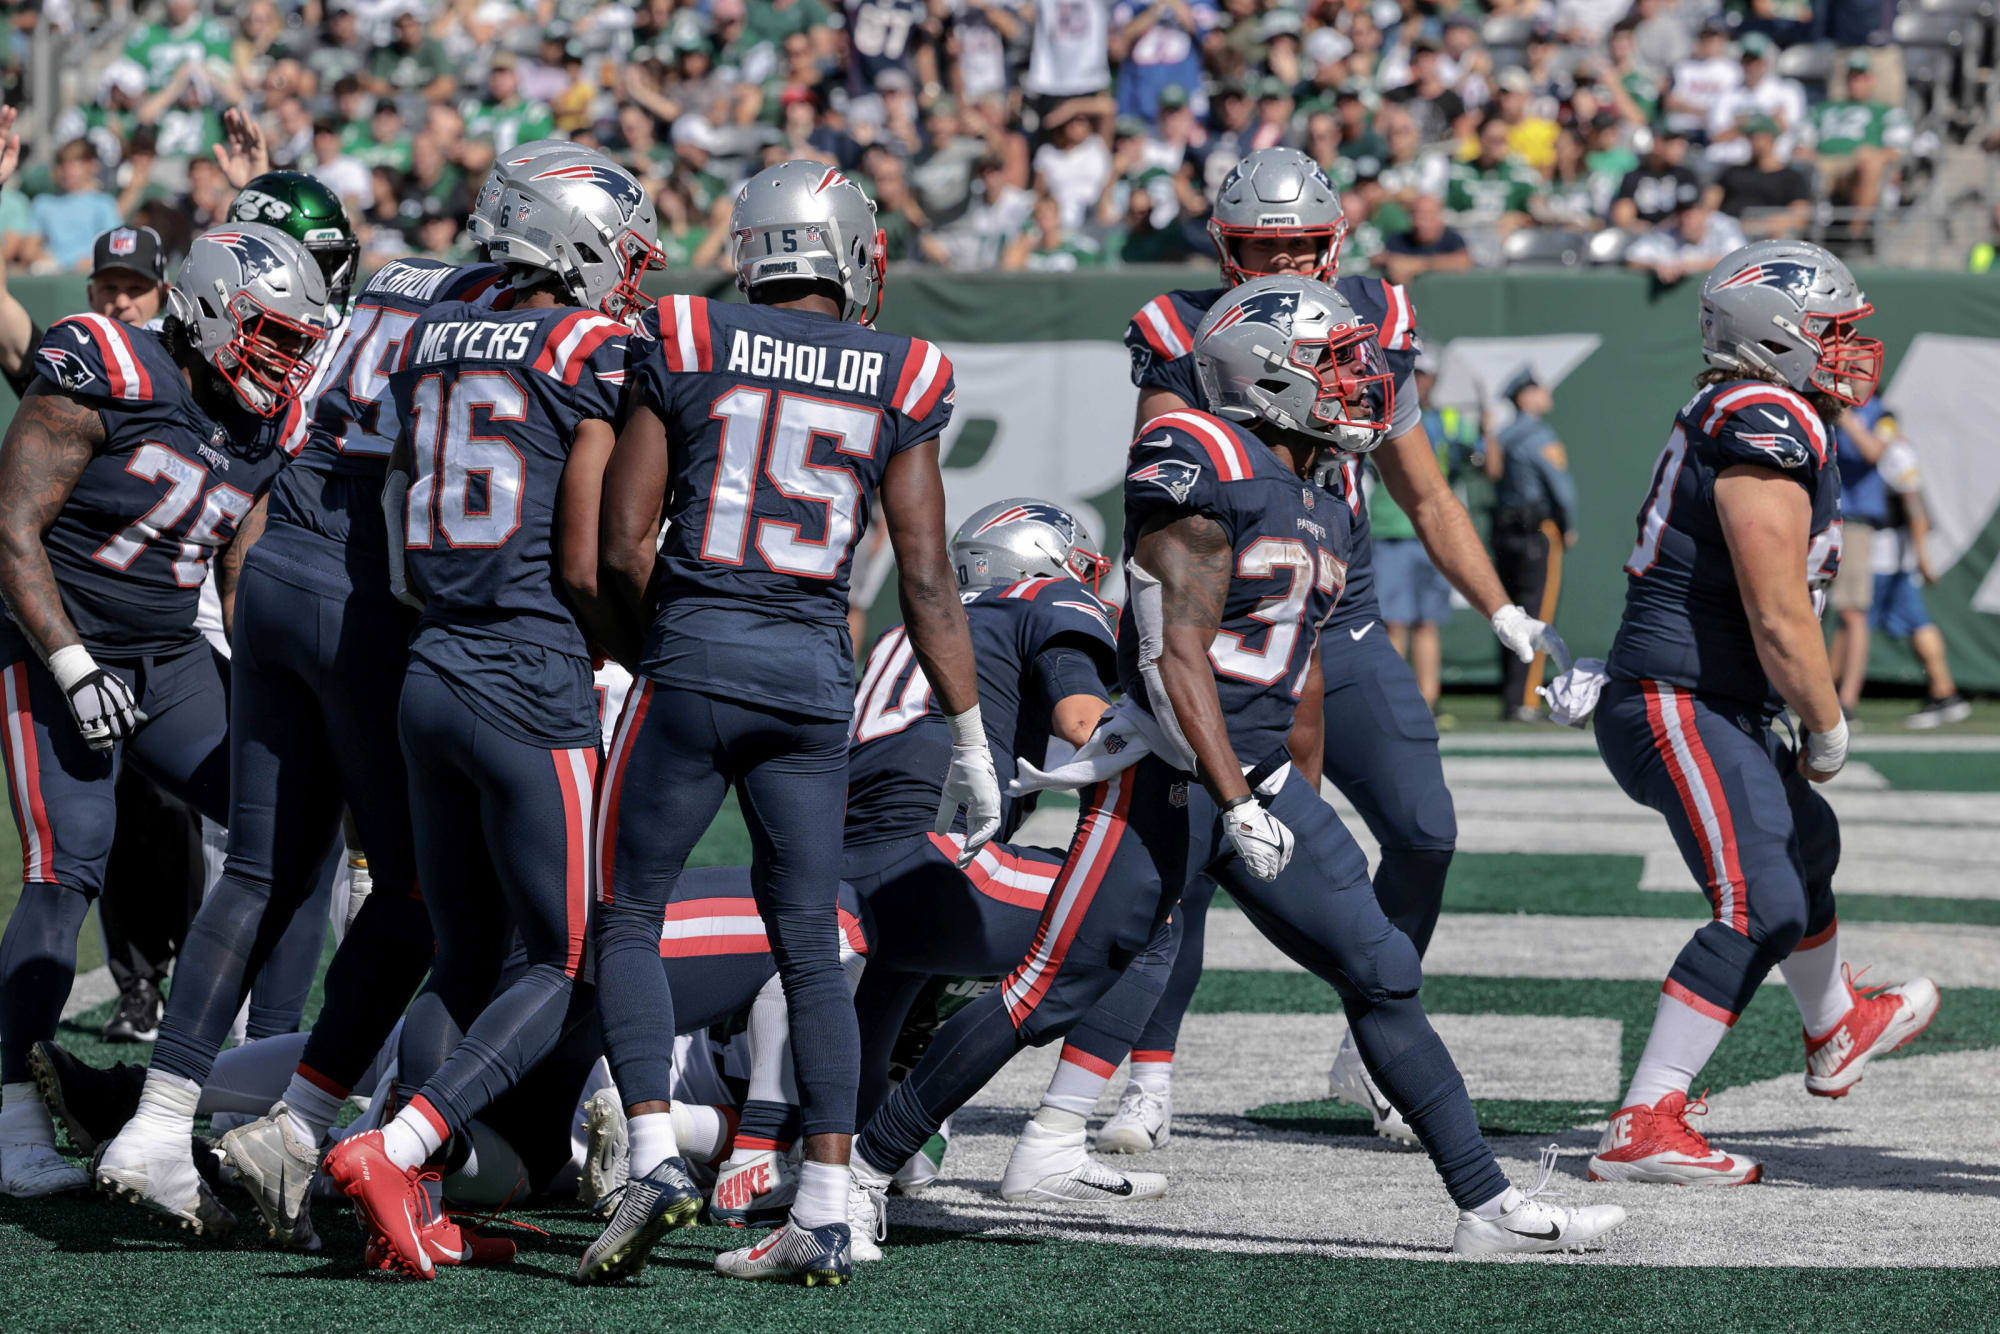 New England Patriots 3 areas of improvement as Week 3 approaches